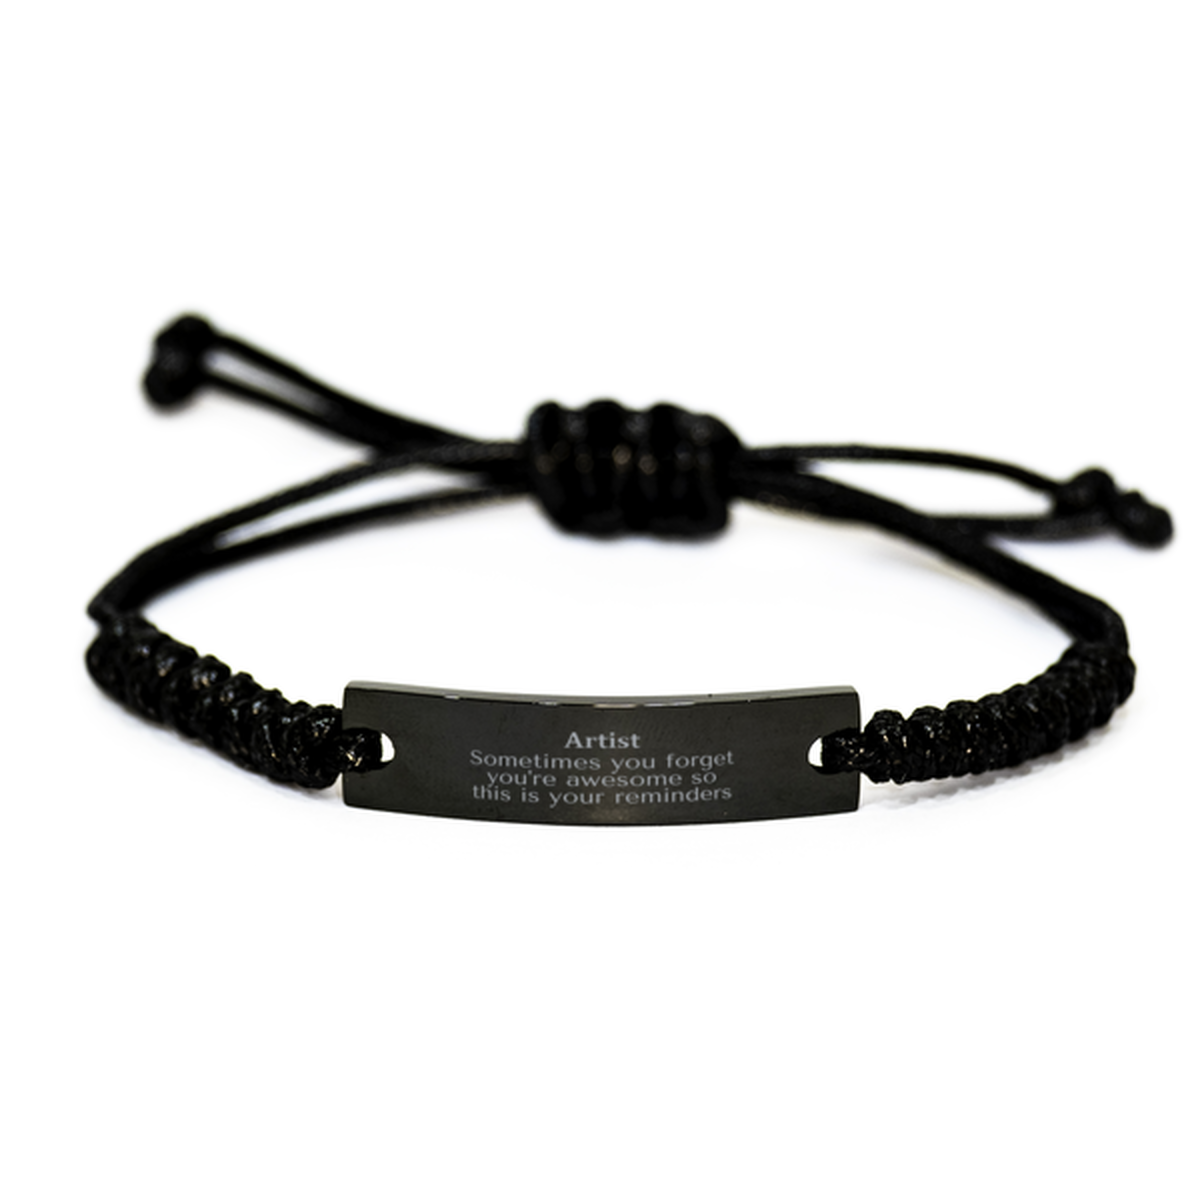 Sentimental Artist Black Rope Bracelet, Artist Sometimes you forget you're awesome so this is your reminders, Graduation Christmas Birthday Gifts for Artist, Men, Women, Coworkers